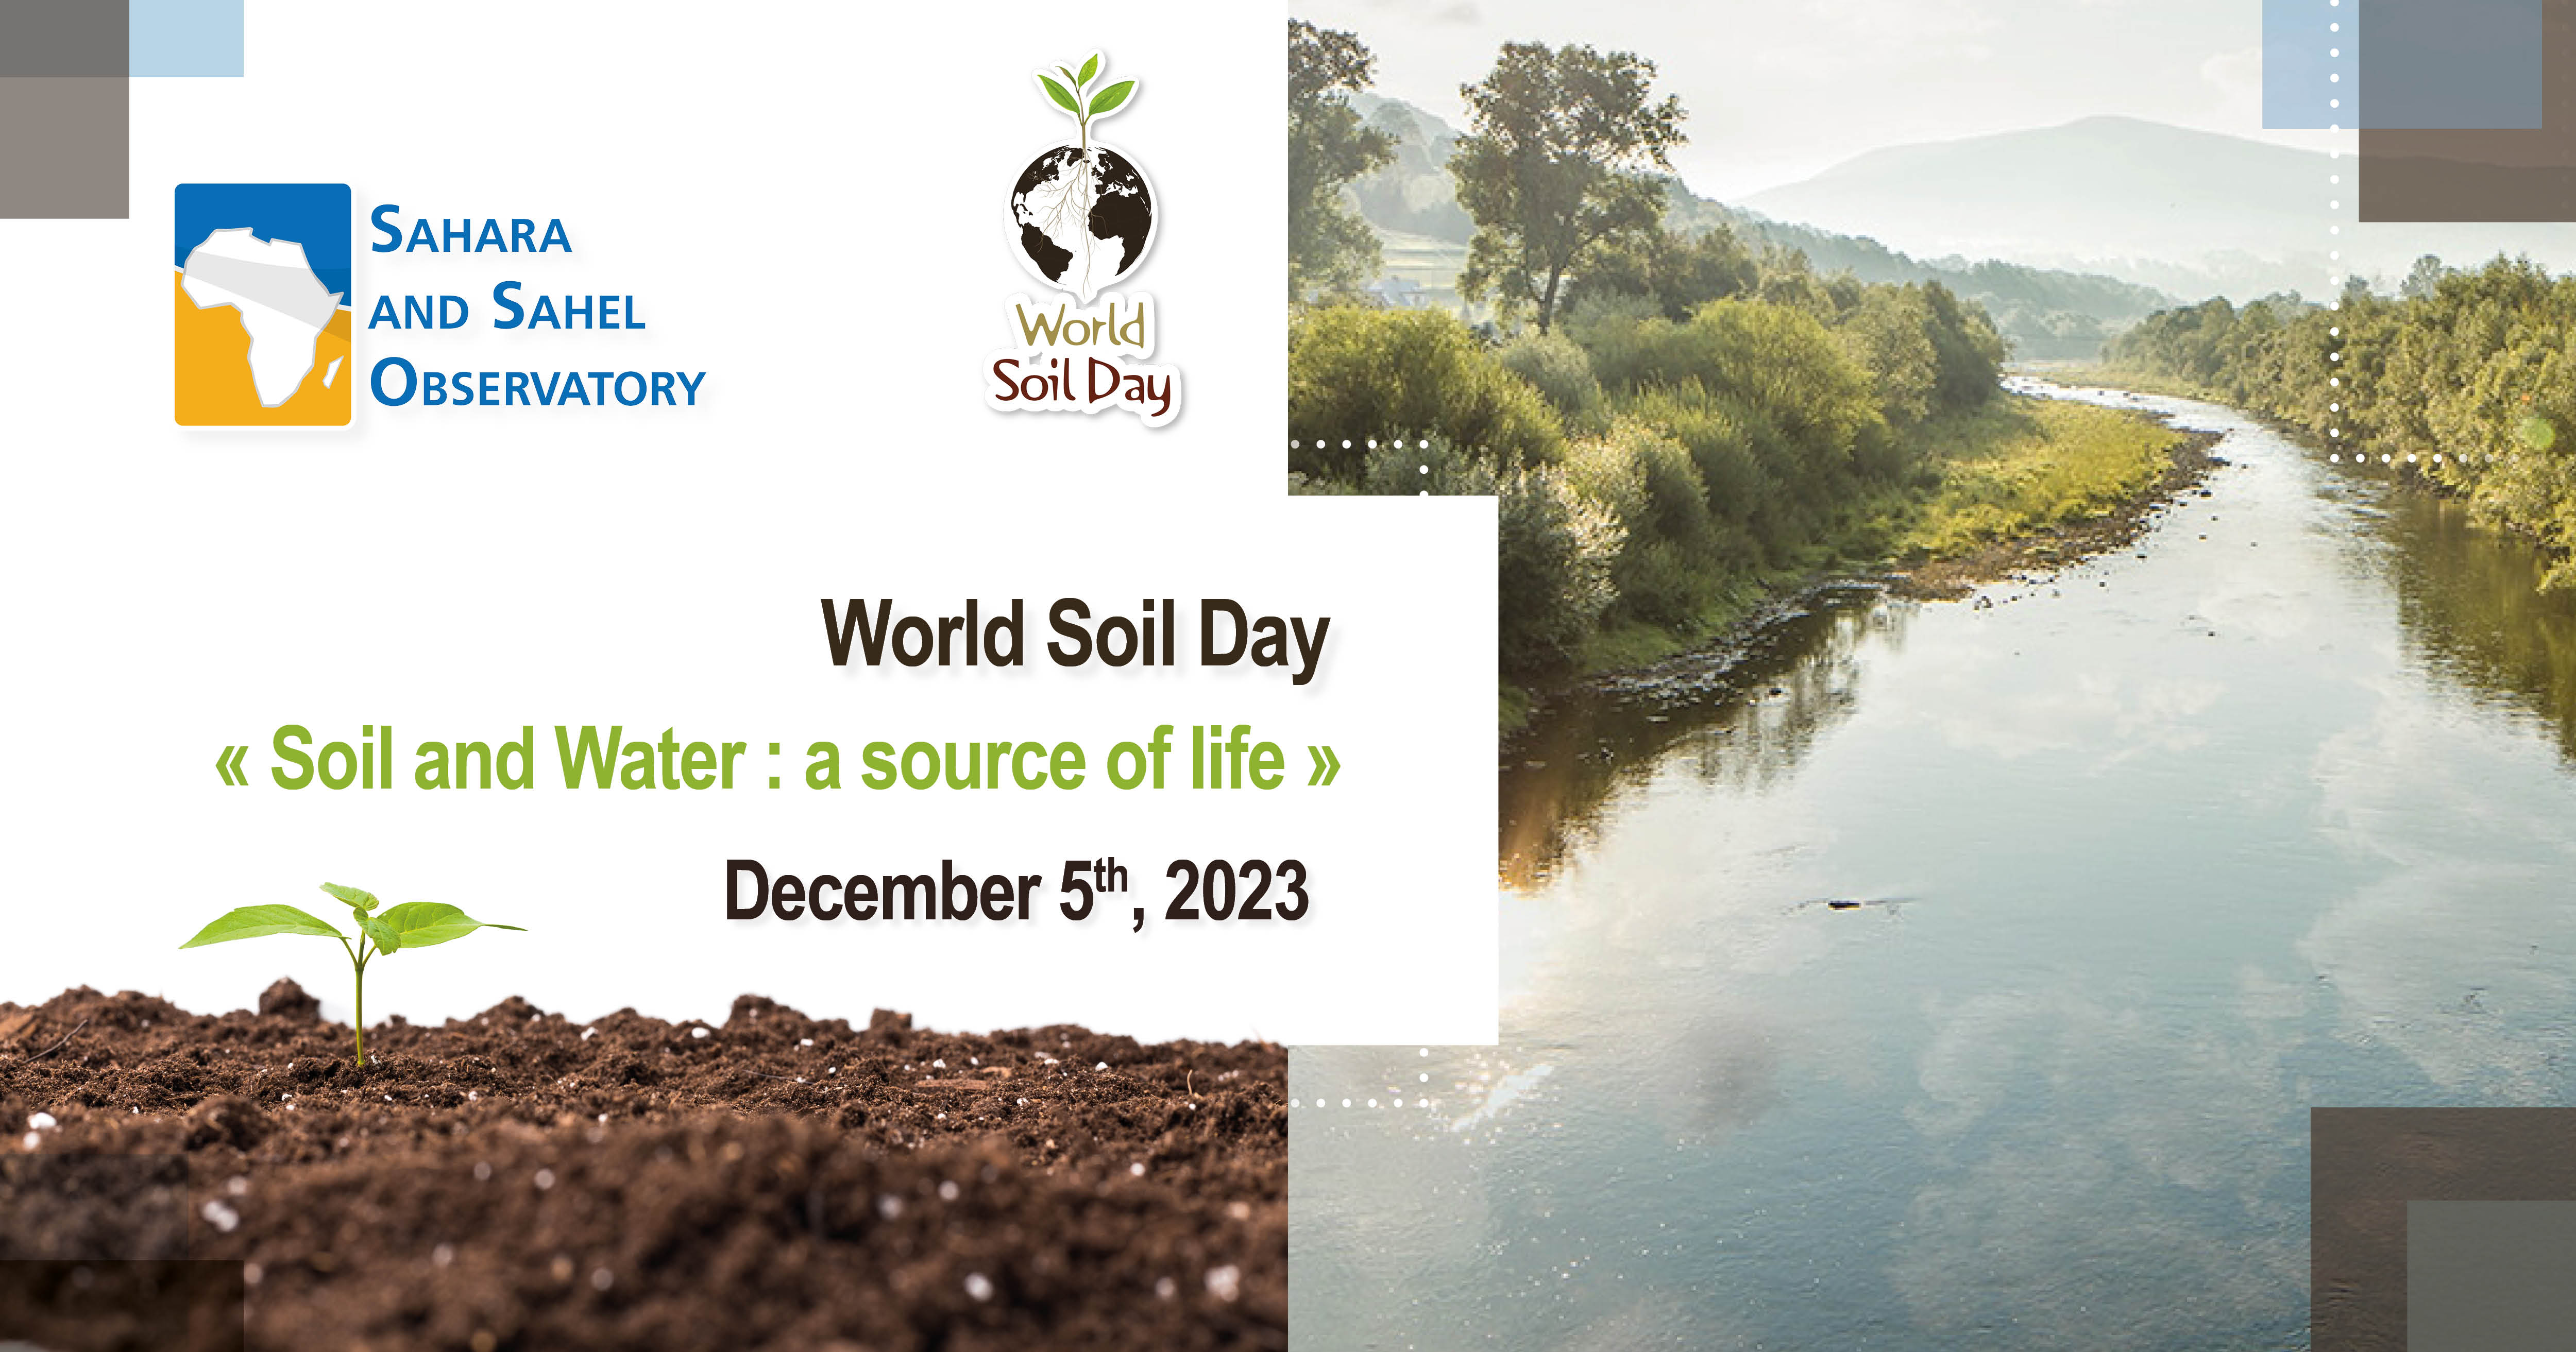 World Soil Day - December 5, 2023 « Soil and Water: a source of life »